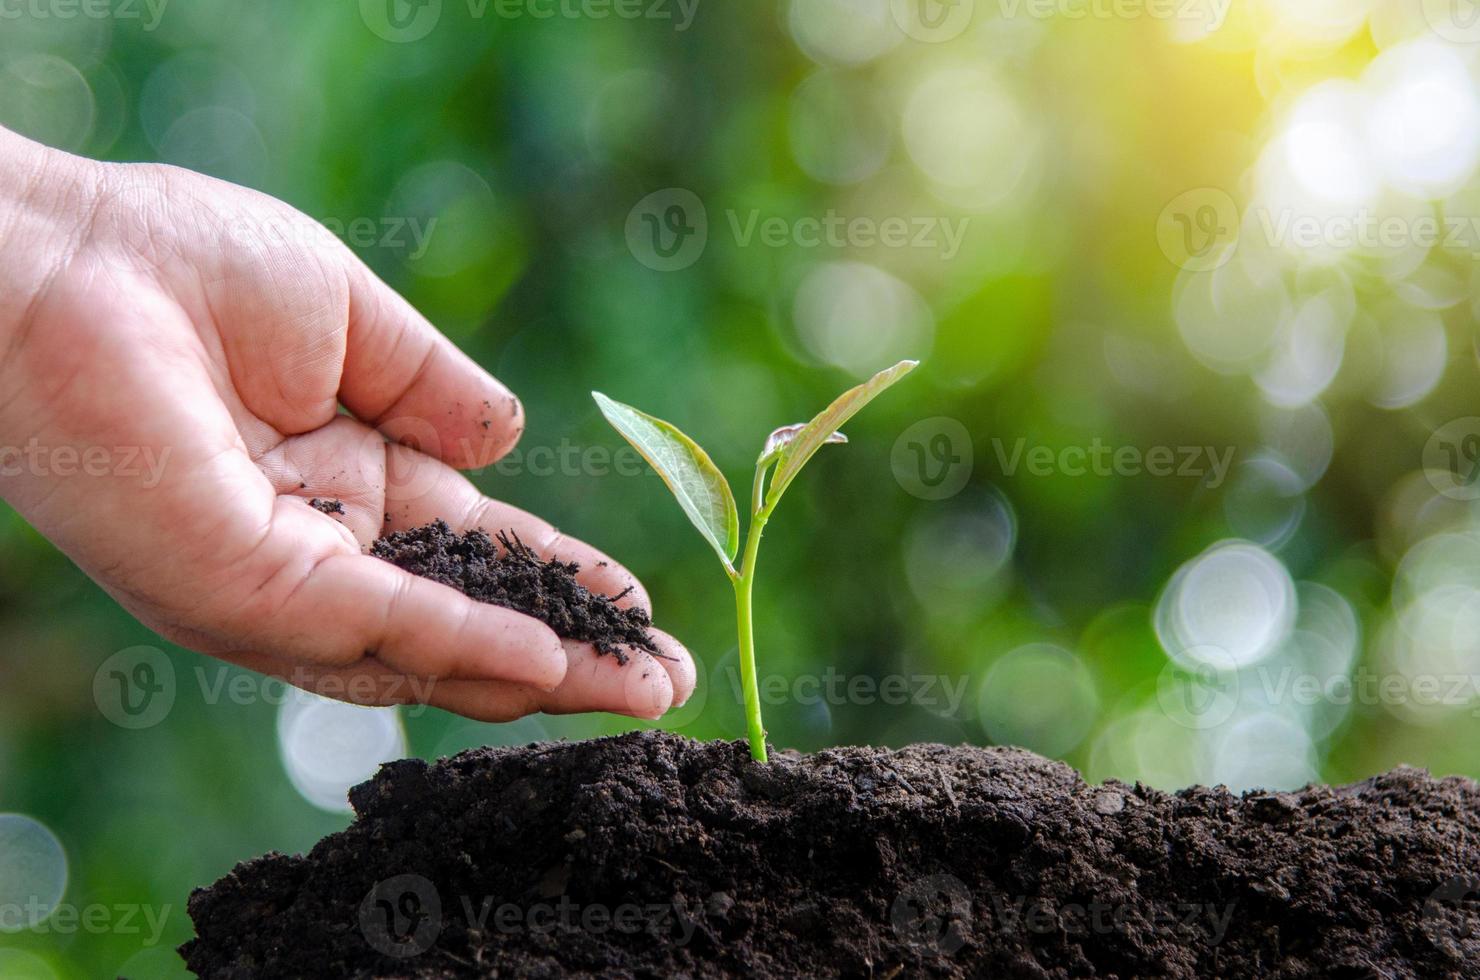 tree sapling hand planting sprout in soil with sunset close up male hand planting young tree over green background photo